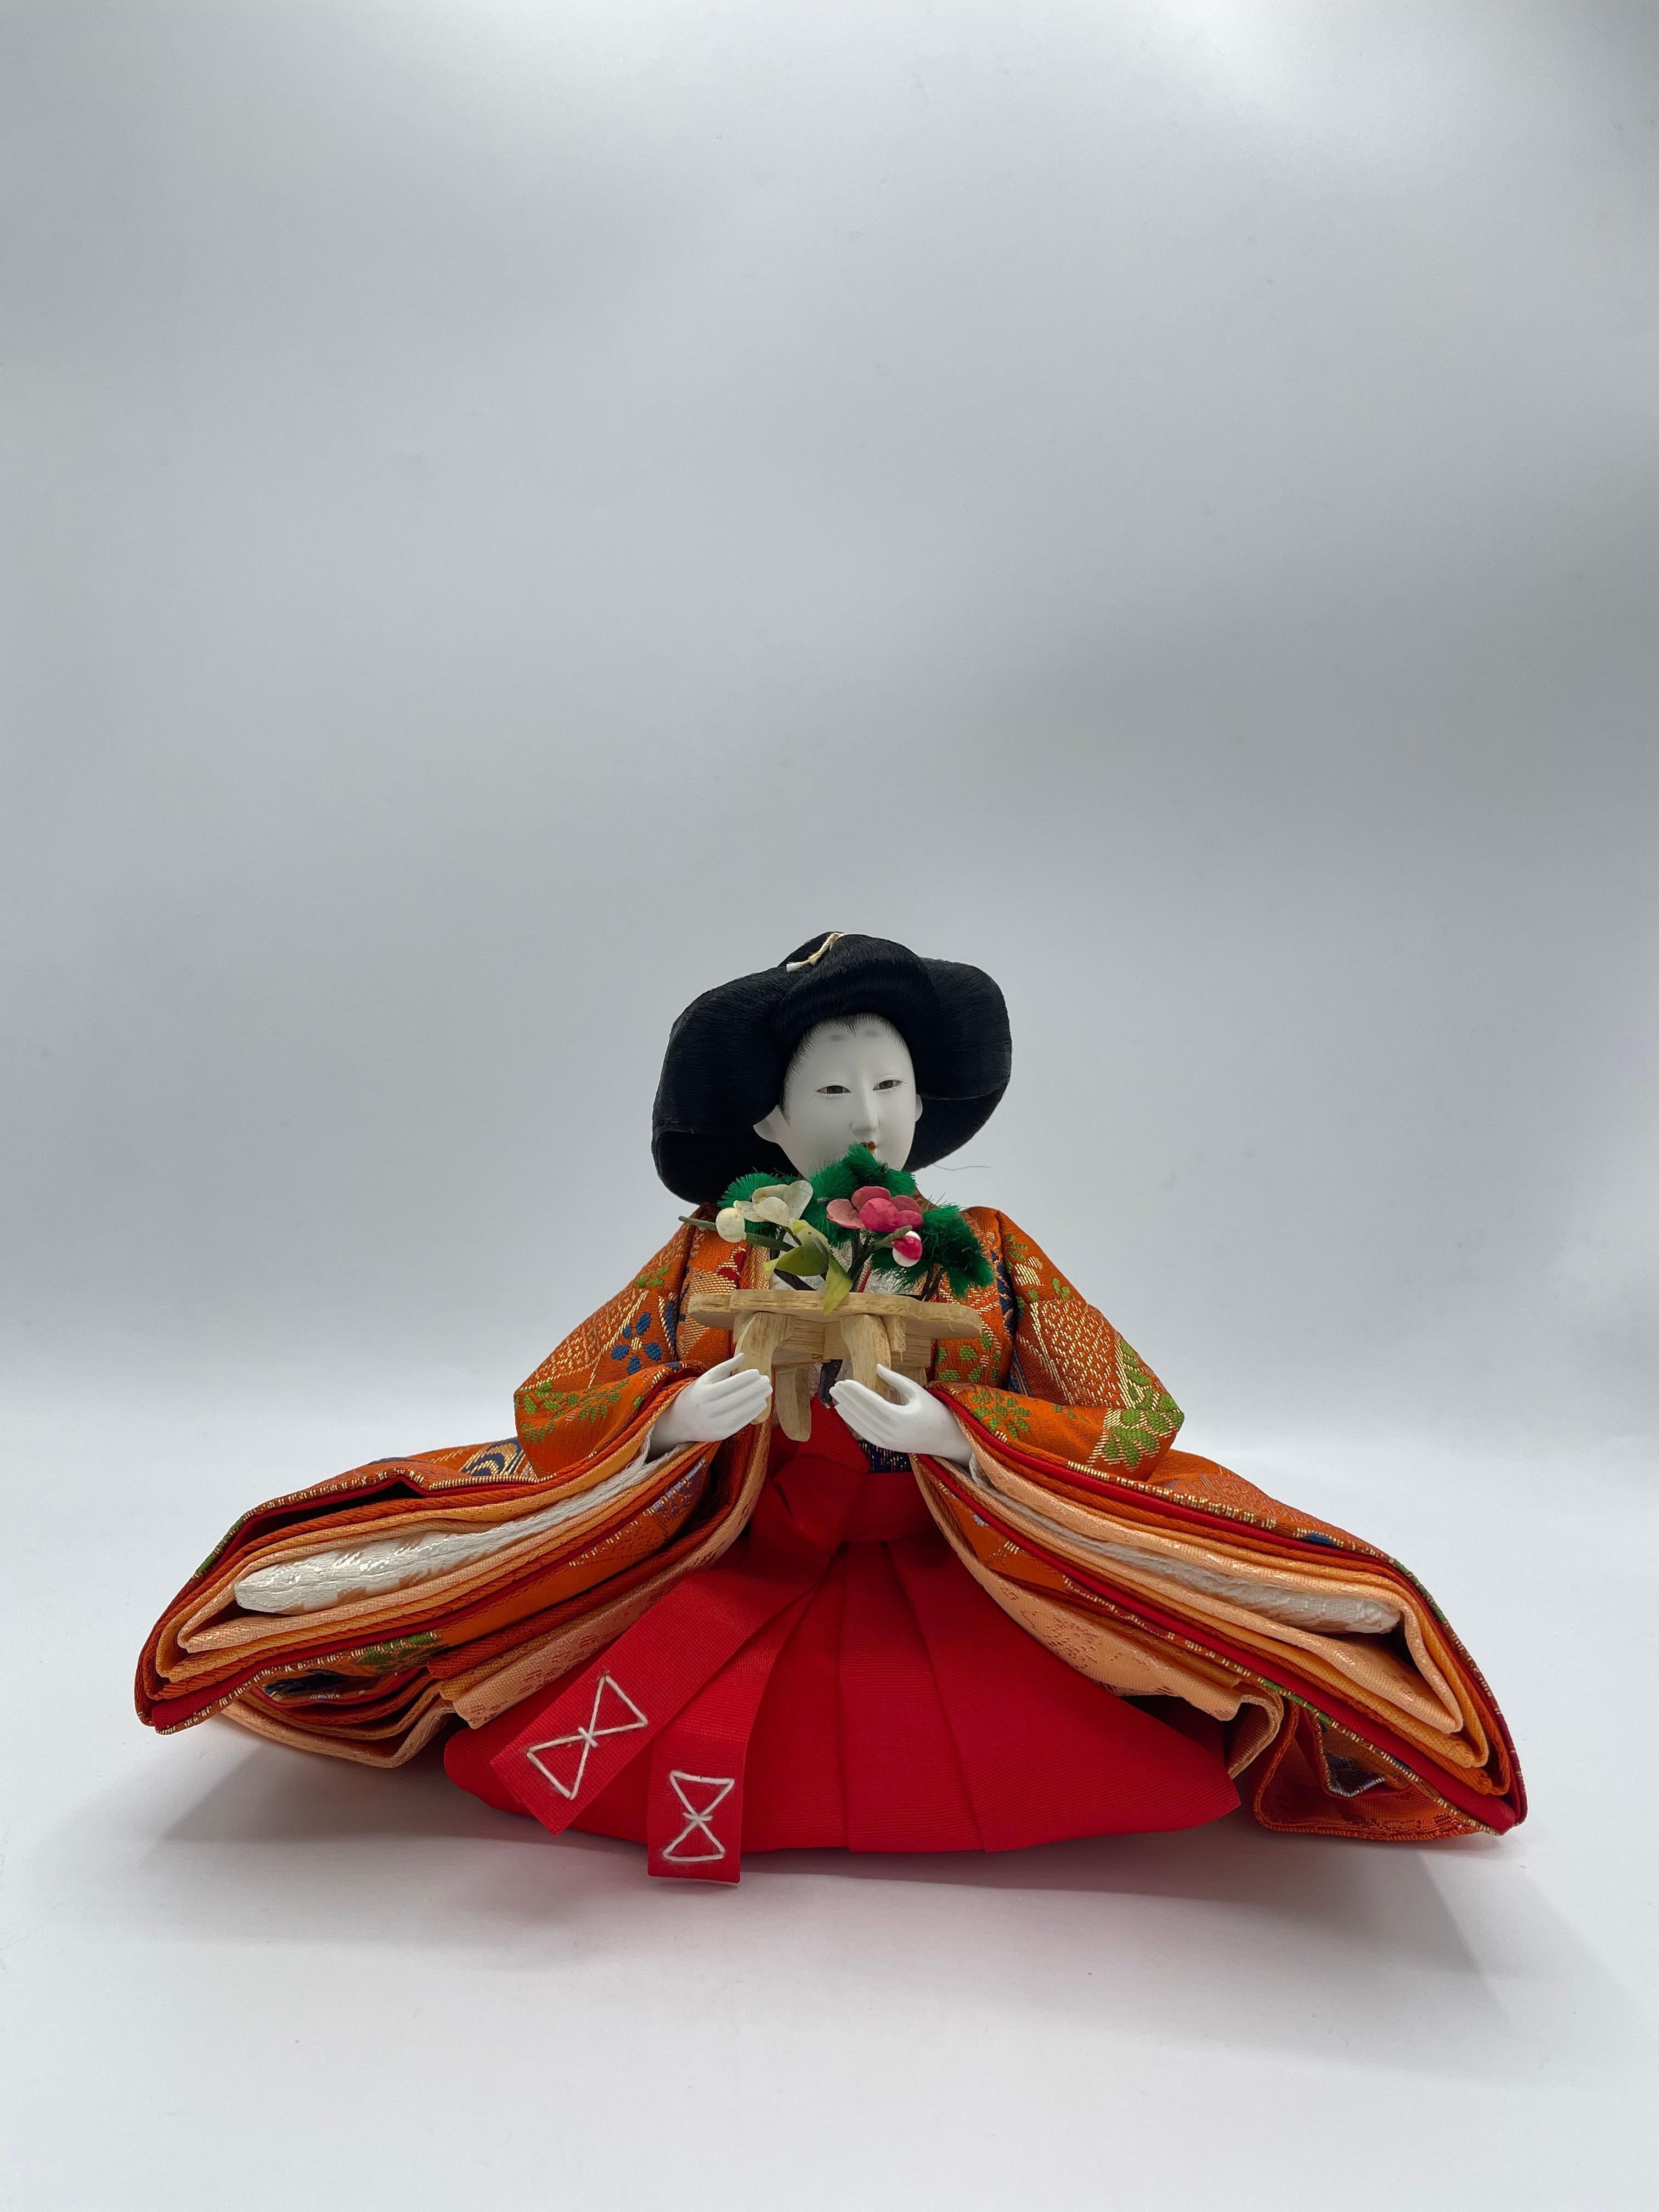 This is a doll which we use for Hinamatsuri day. This person is one of Sannin Kanjo which is called Sanpo.
This person has a flower . This doll was made with plastic, cotton, silk , wood and metal. This doll was made around 1980s in Showa era.